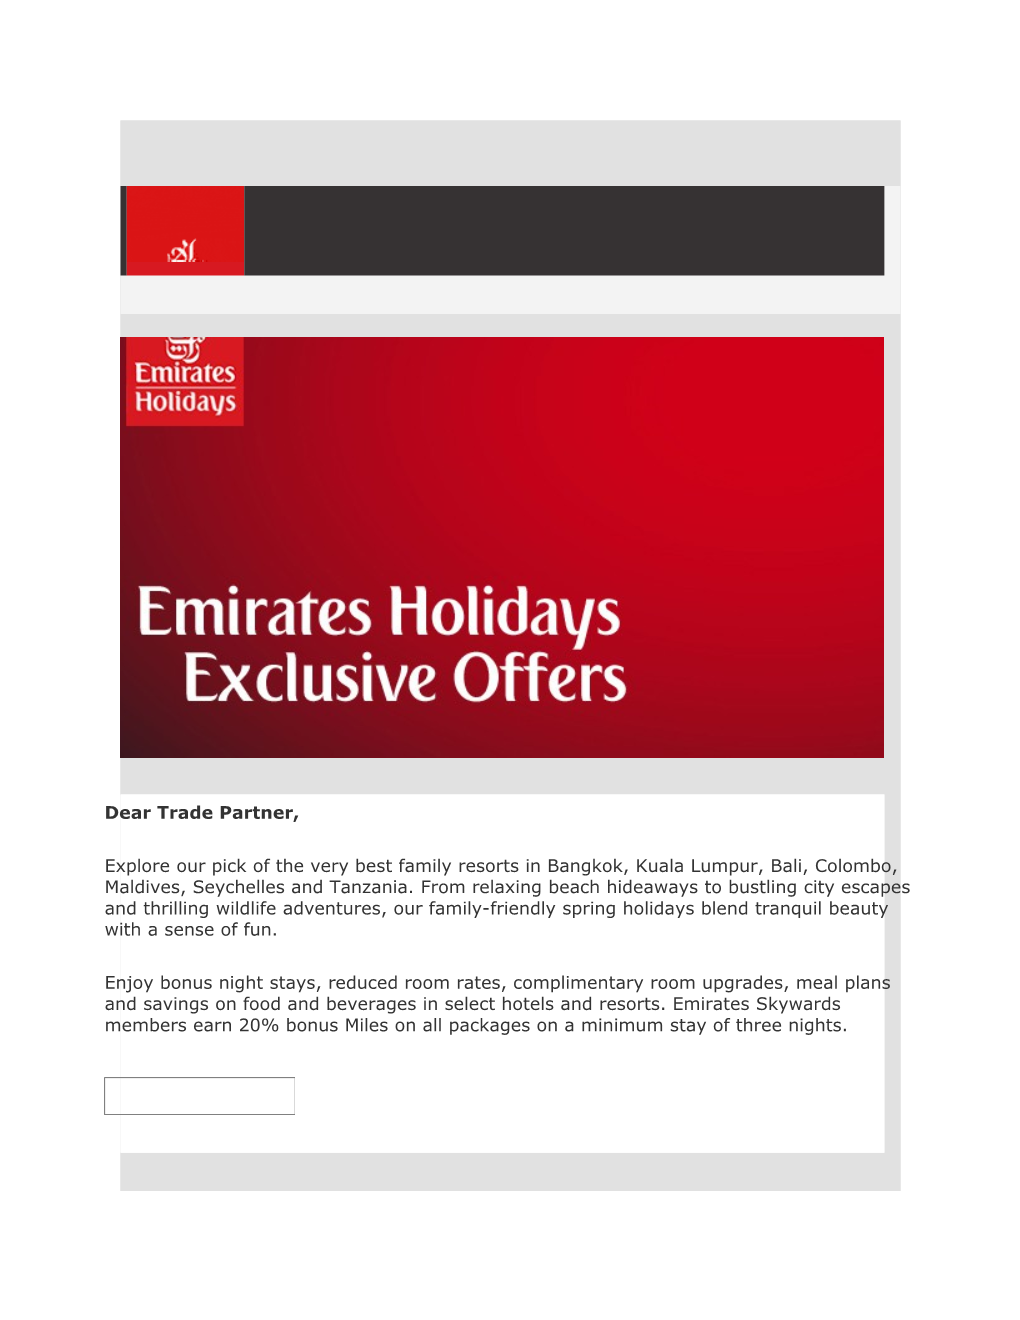 Economy Class Return Flights to Tanzania with Emirates Airline